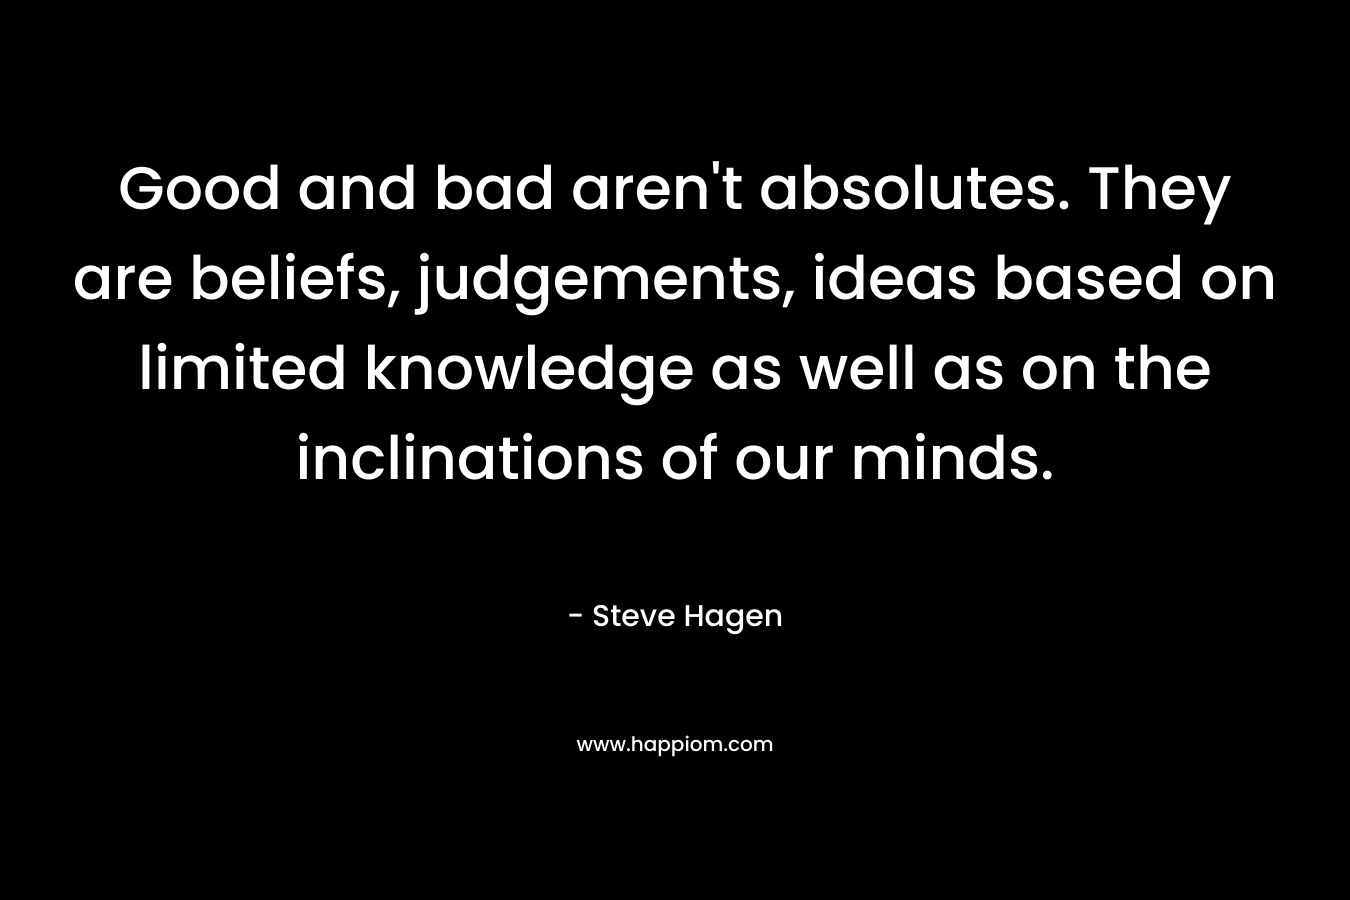 Good and bad aren't absolutes. They are beliefs, judgements, ideas based on limited knowledge as well as on the inclinations of our minds.